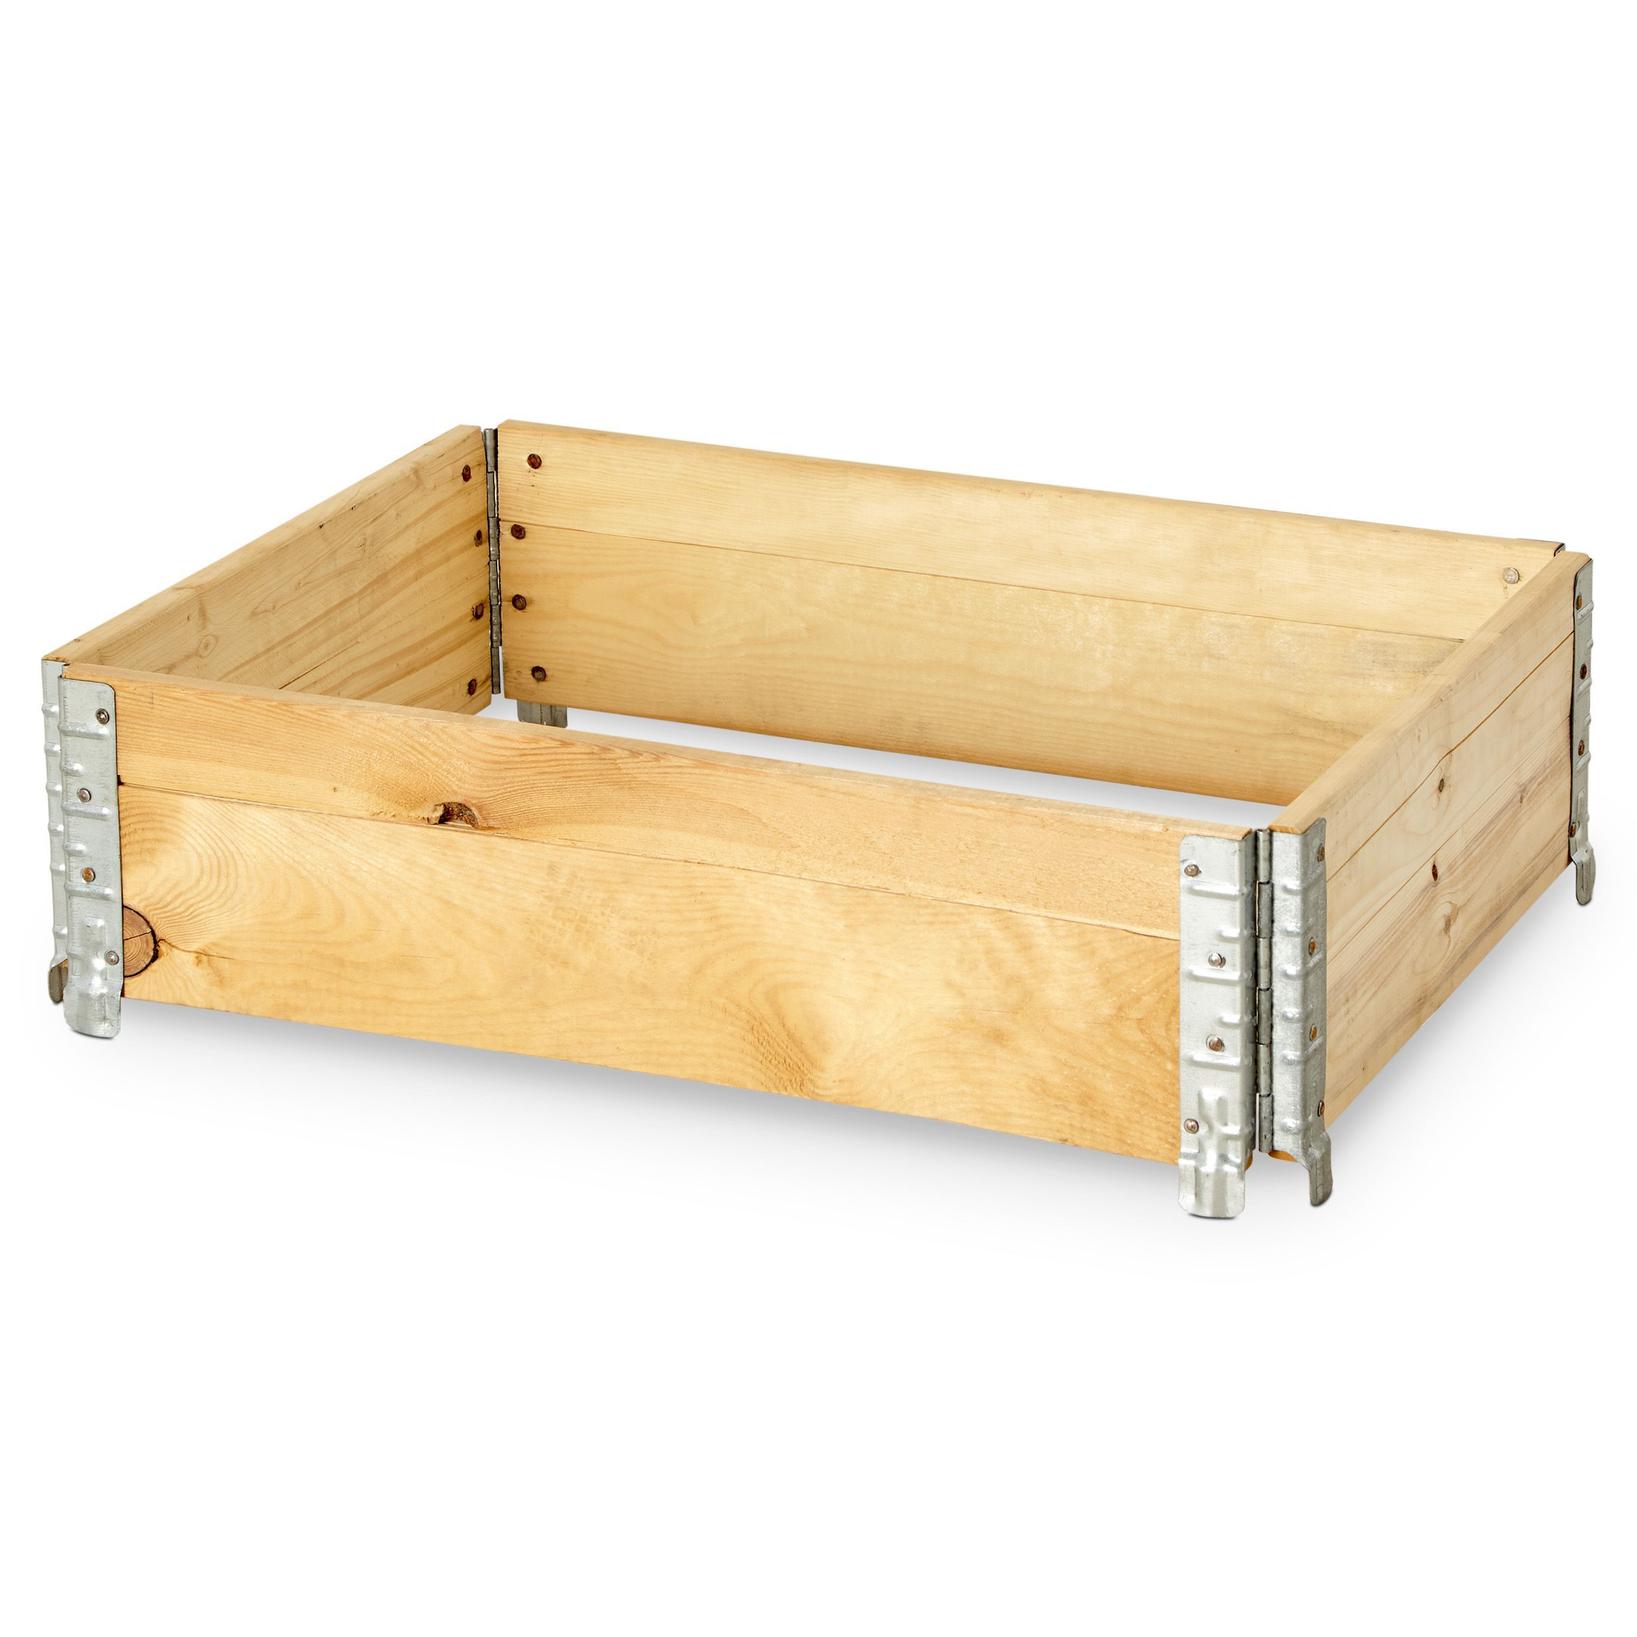 Verve Small Pine & steel Rectangular Raised bed kit 0.48m² offers at £20 in B&Q